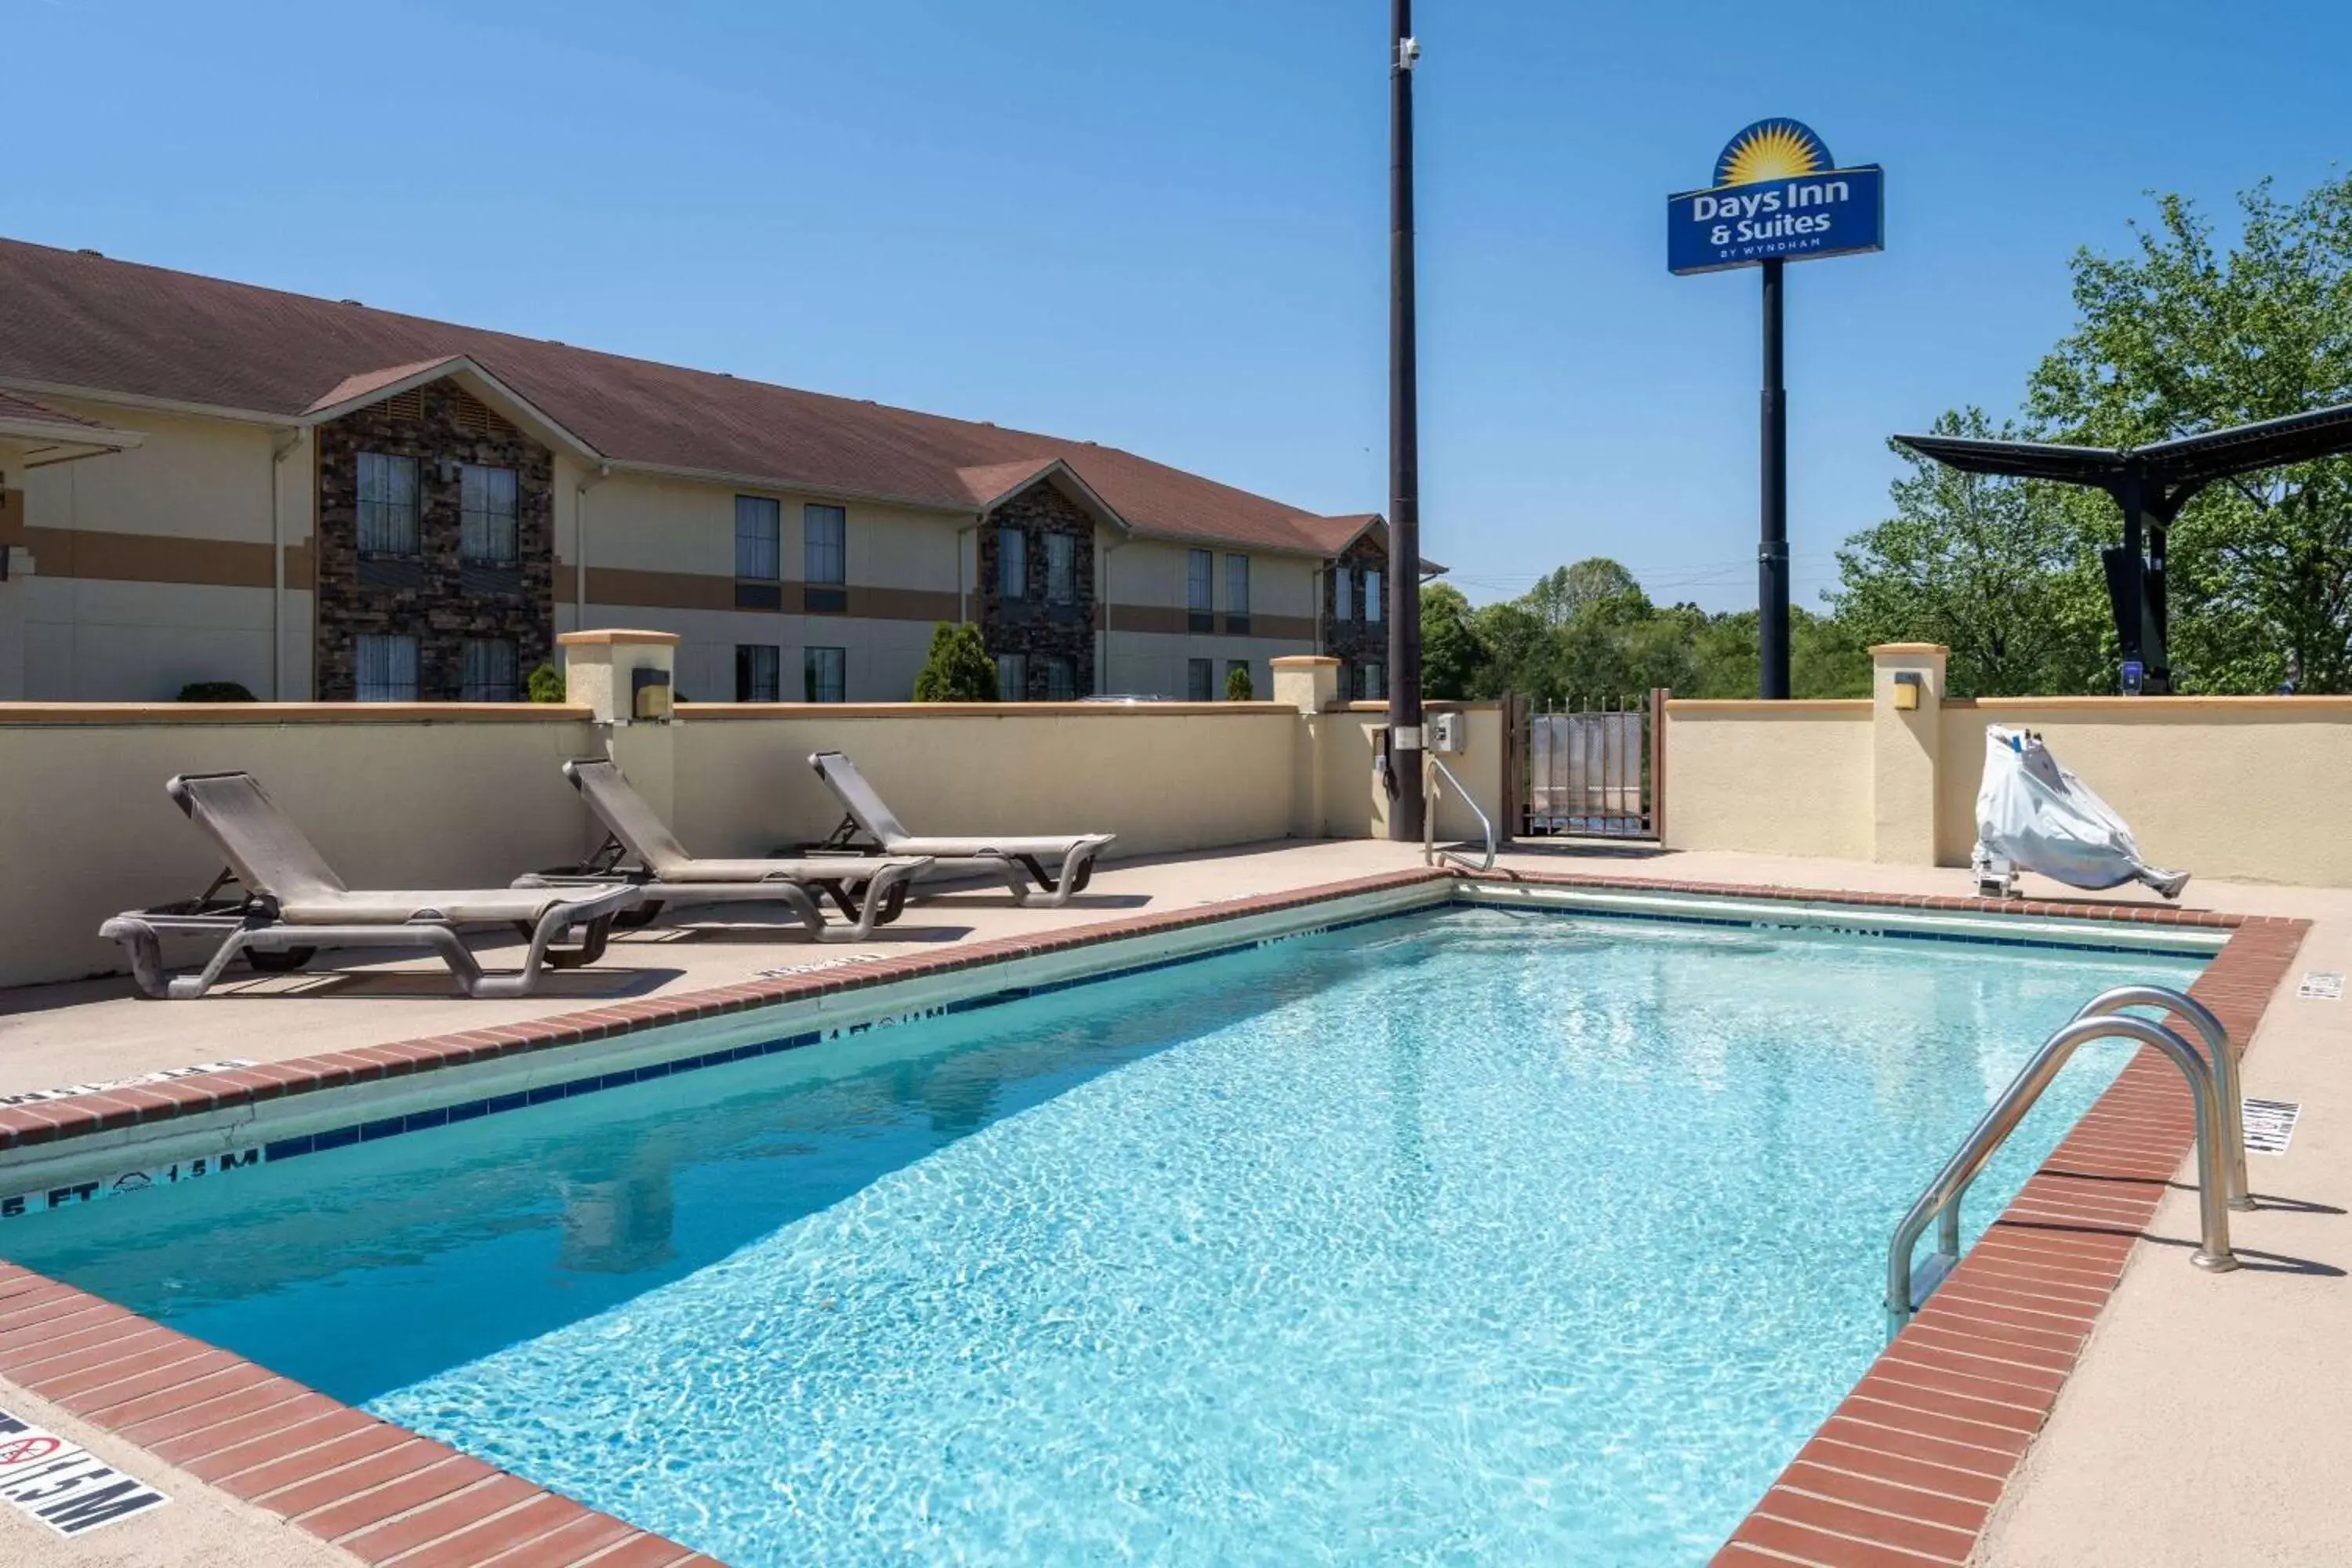 Pool view, Property Building in Days Inn & Suites by Wyndham Commerce